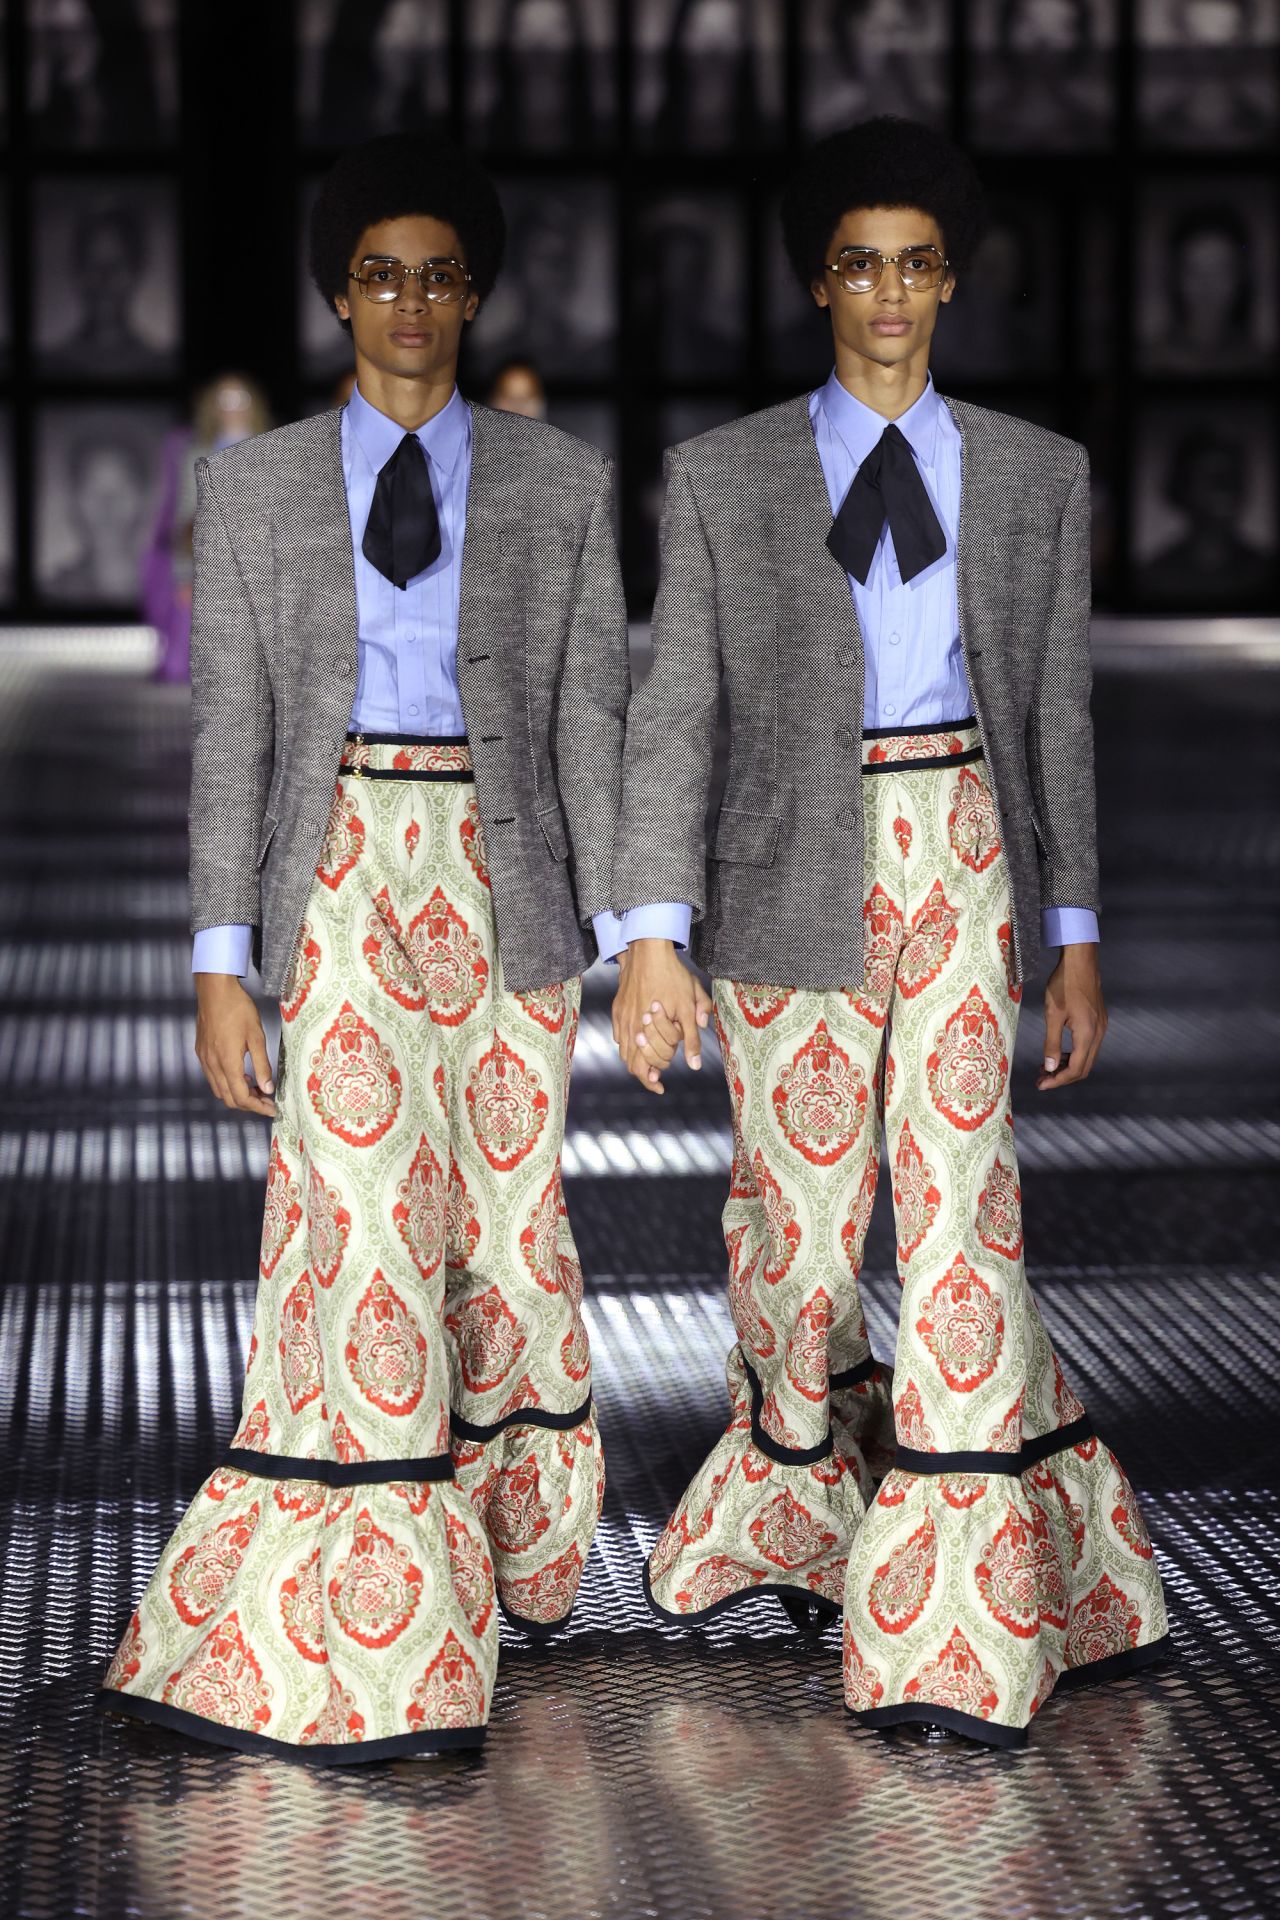 Models walk the runway at Milan Fashion Week in Michele's last major show for Gucci.